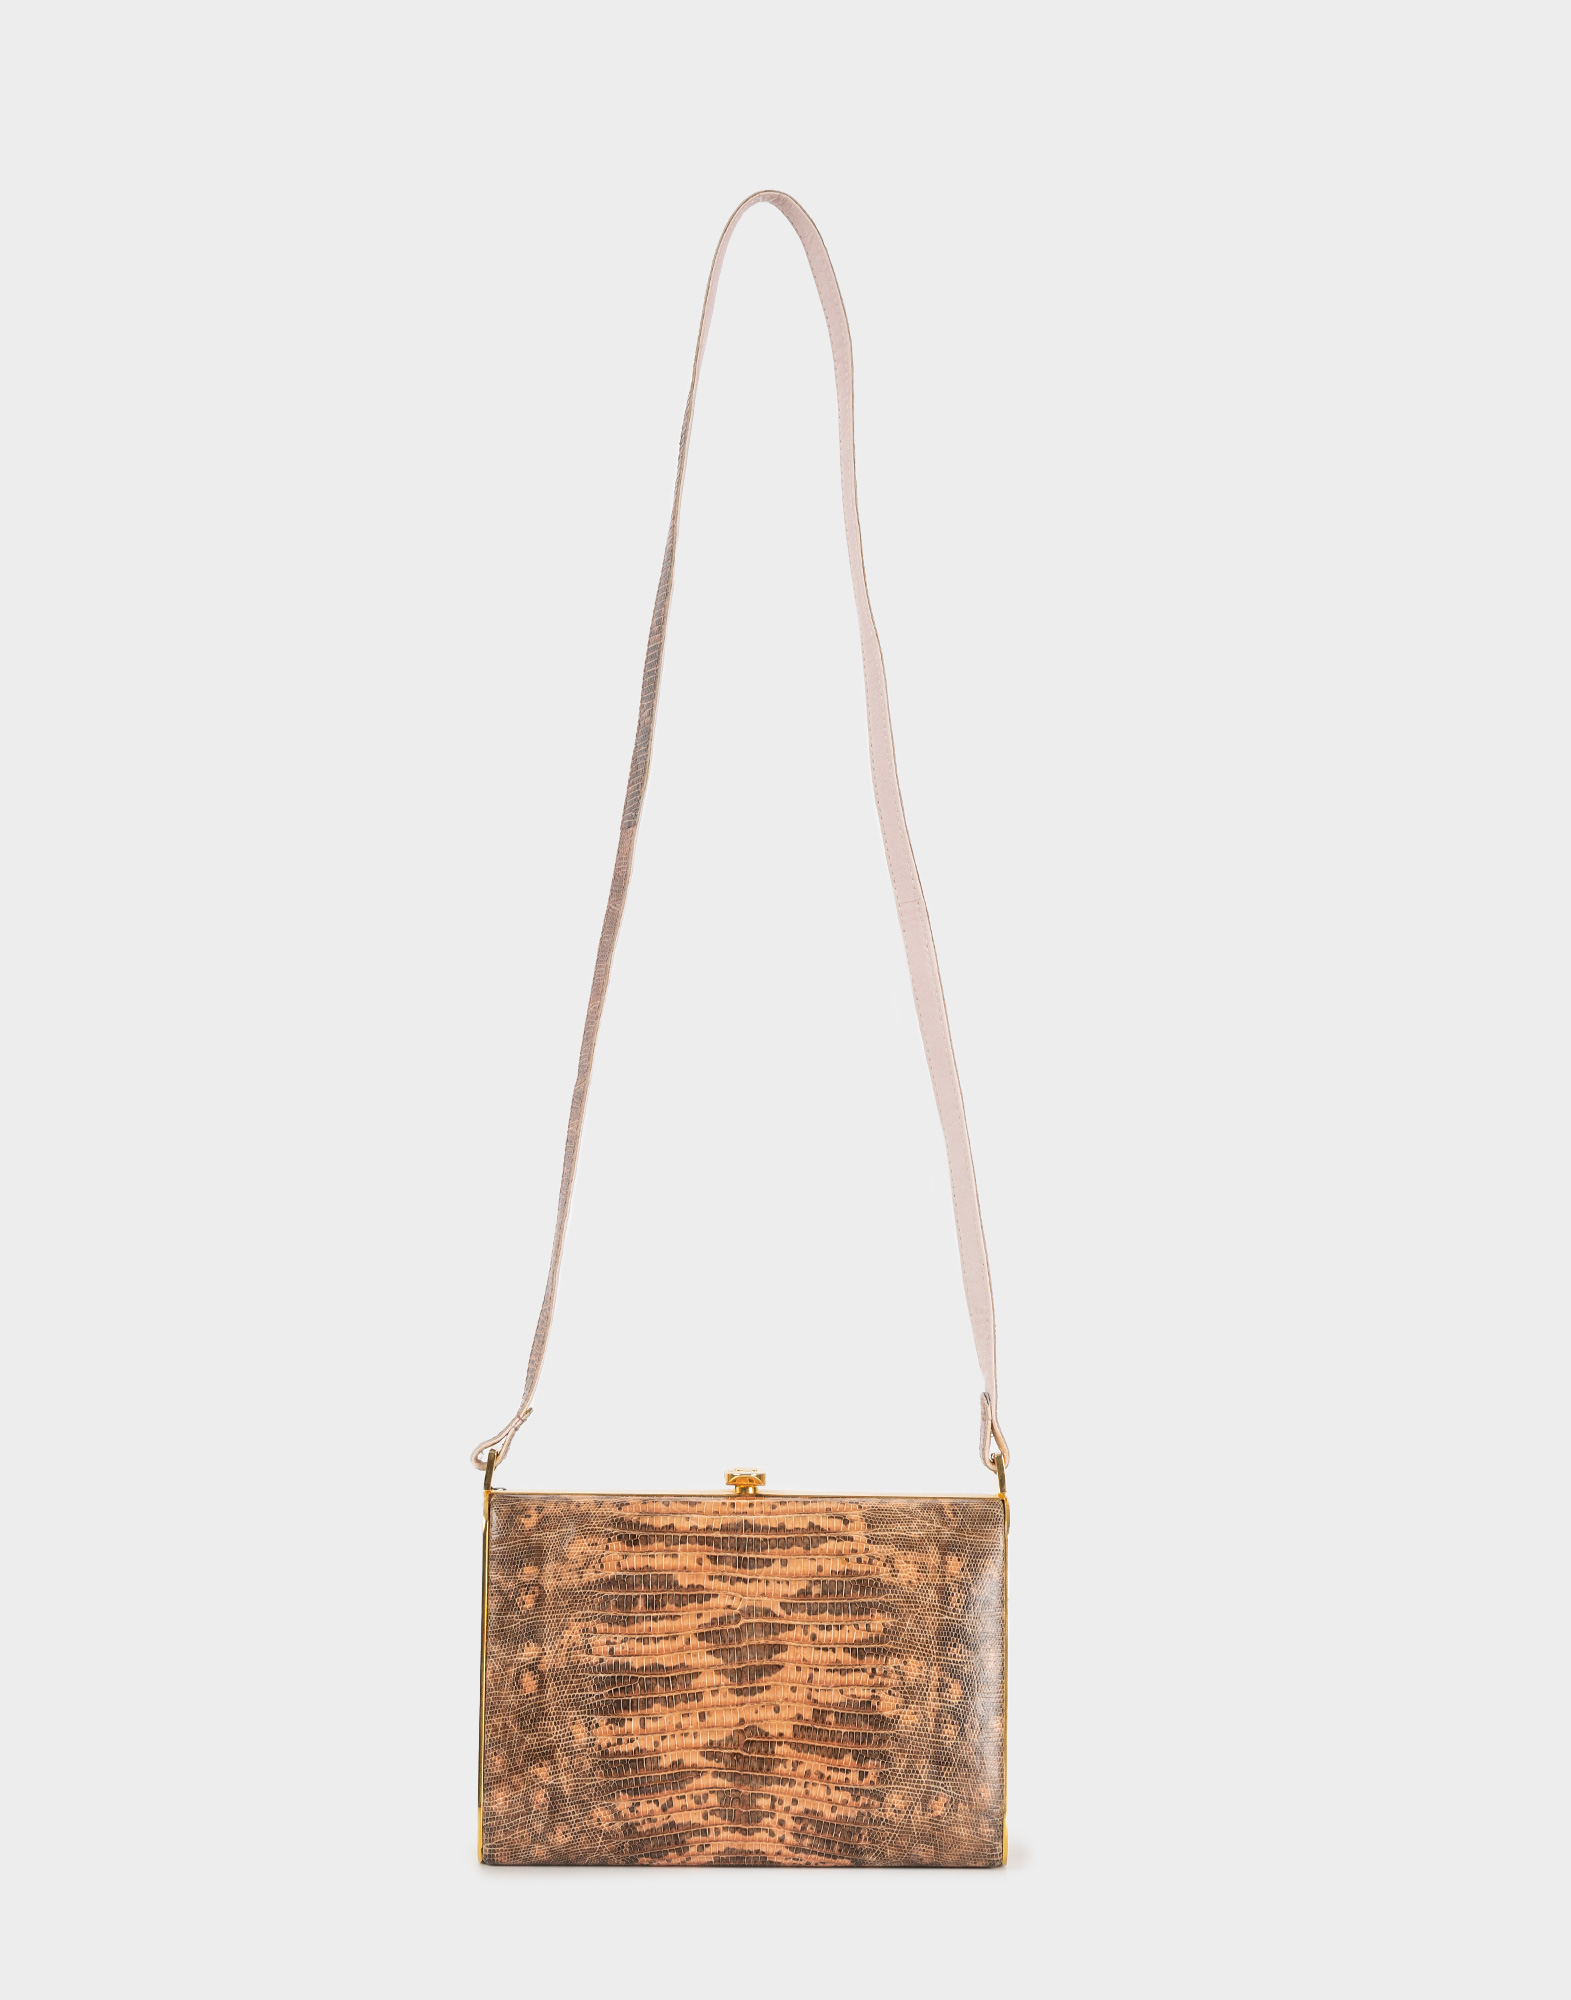 small stiff pink and brown snakeskin bag with long shoulder strap, top clasp with gold clip